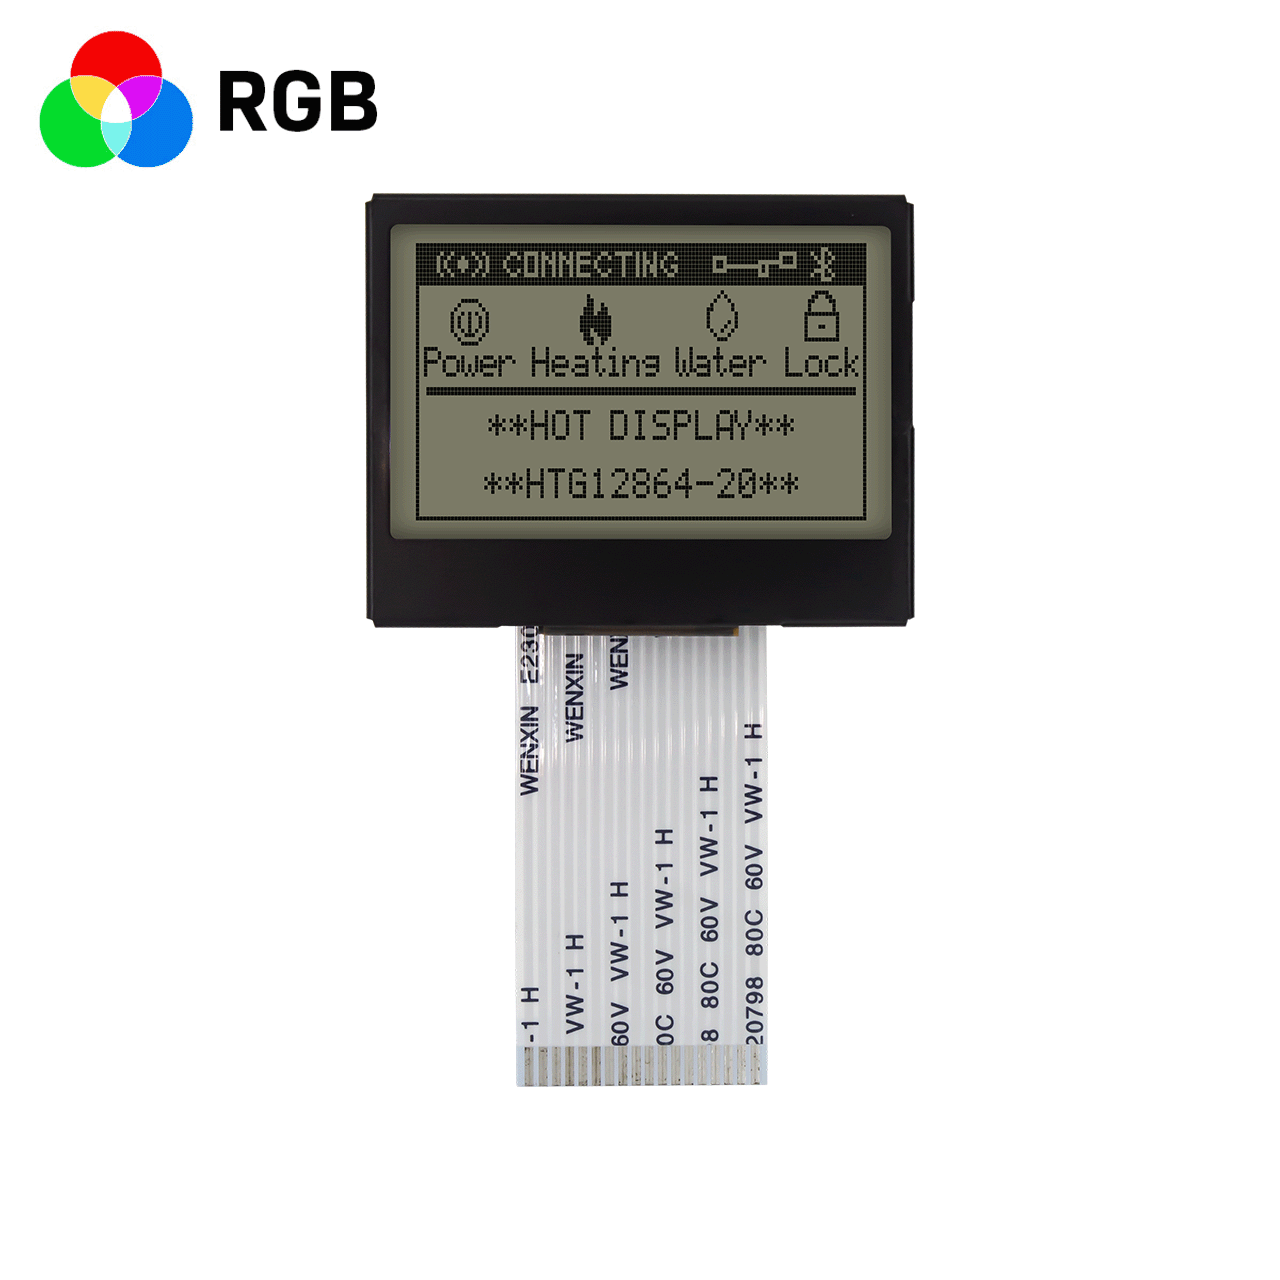 1.7-inch LCD12864 industrial control LCD screen/LCM128x64 graphic dot matrix LCD module/RGB red, green and blue backlight/FSTN front display/fully transparent polarizer